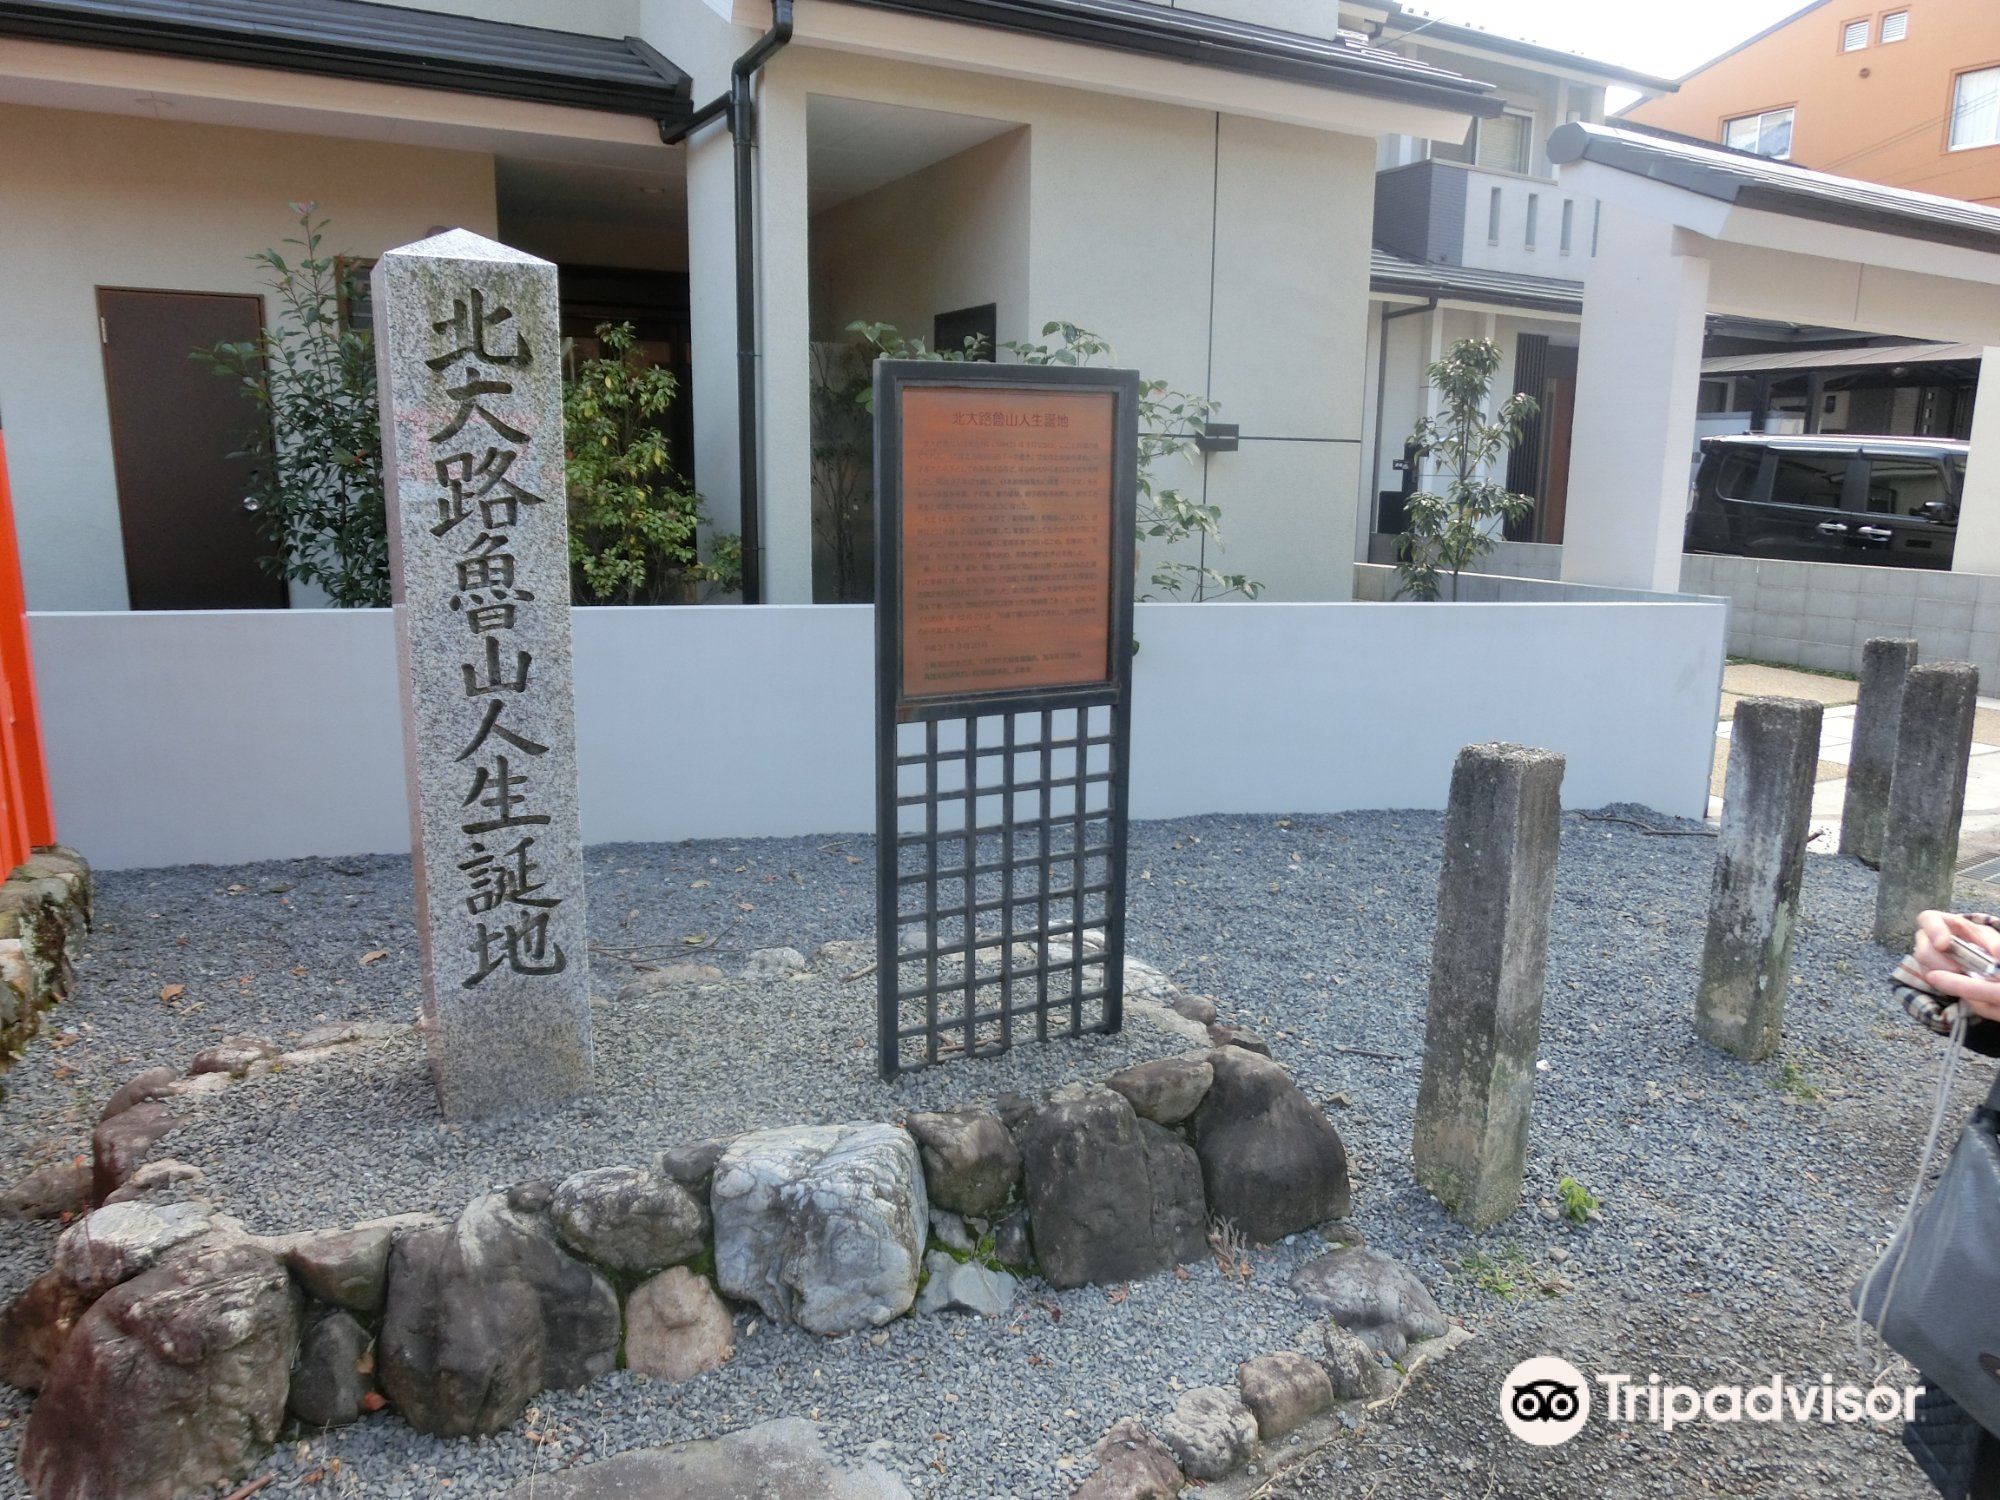 Birthplace of Kitaoji Rosanjin attraction reviews - Birthplace of Kitaoji tickets - Birthplace of Kitaoji Rosanjin discounts Birthplace of Kitaoji Rosanjin transportation, address, opening - attractions, hotels, and food